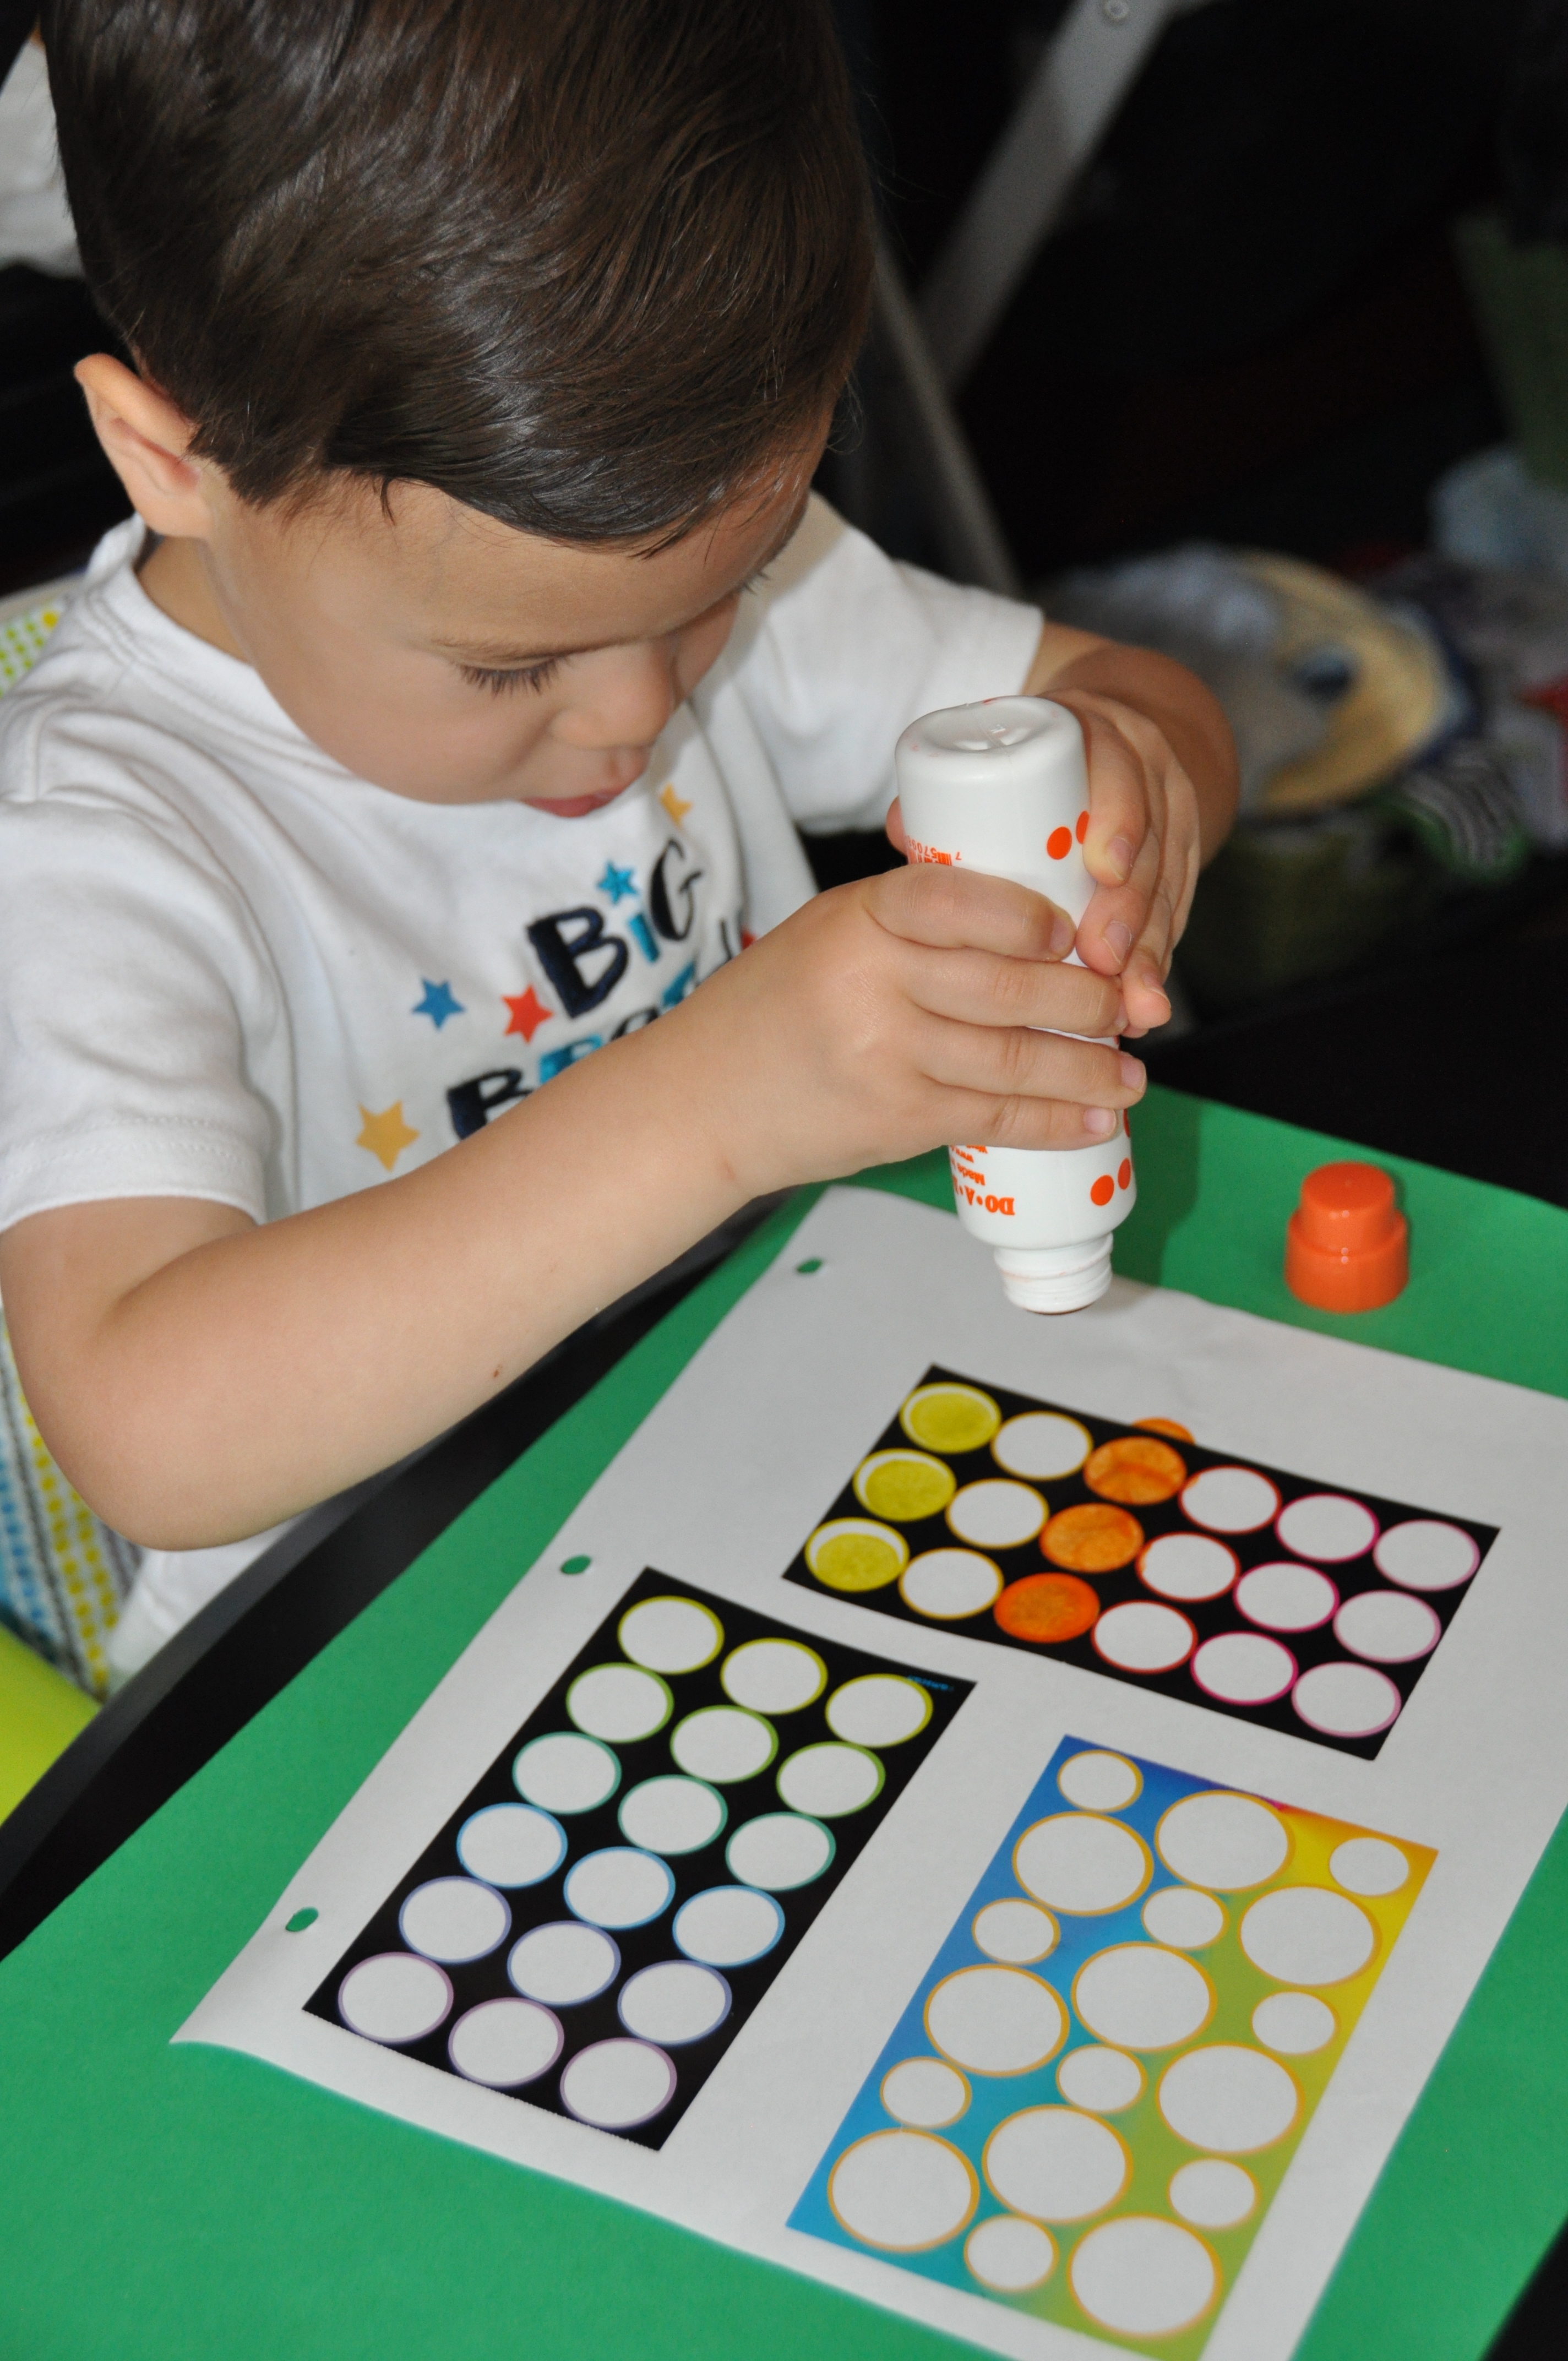 A Simple Dot Marker Activity  Fun & Engaging Activities for Toddlers